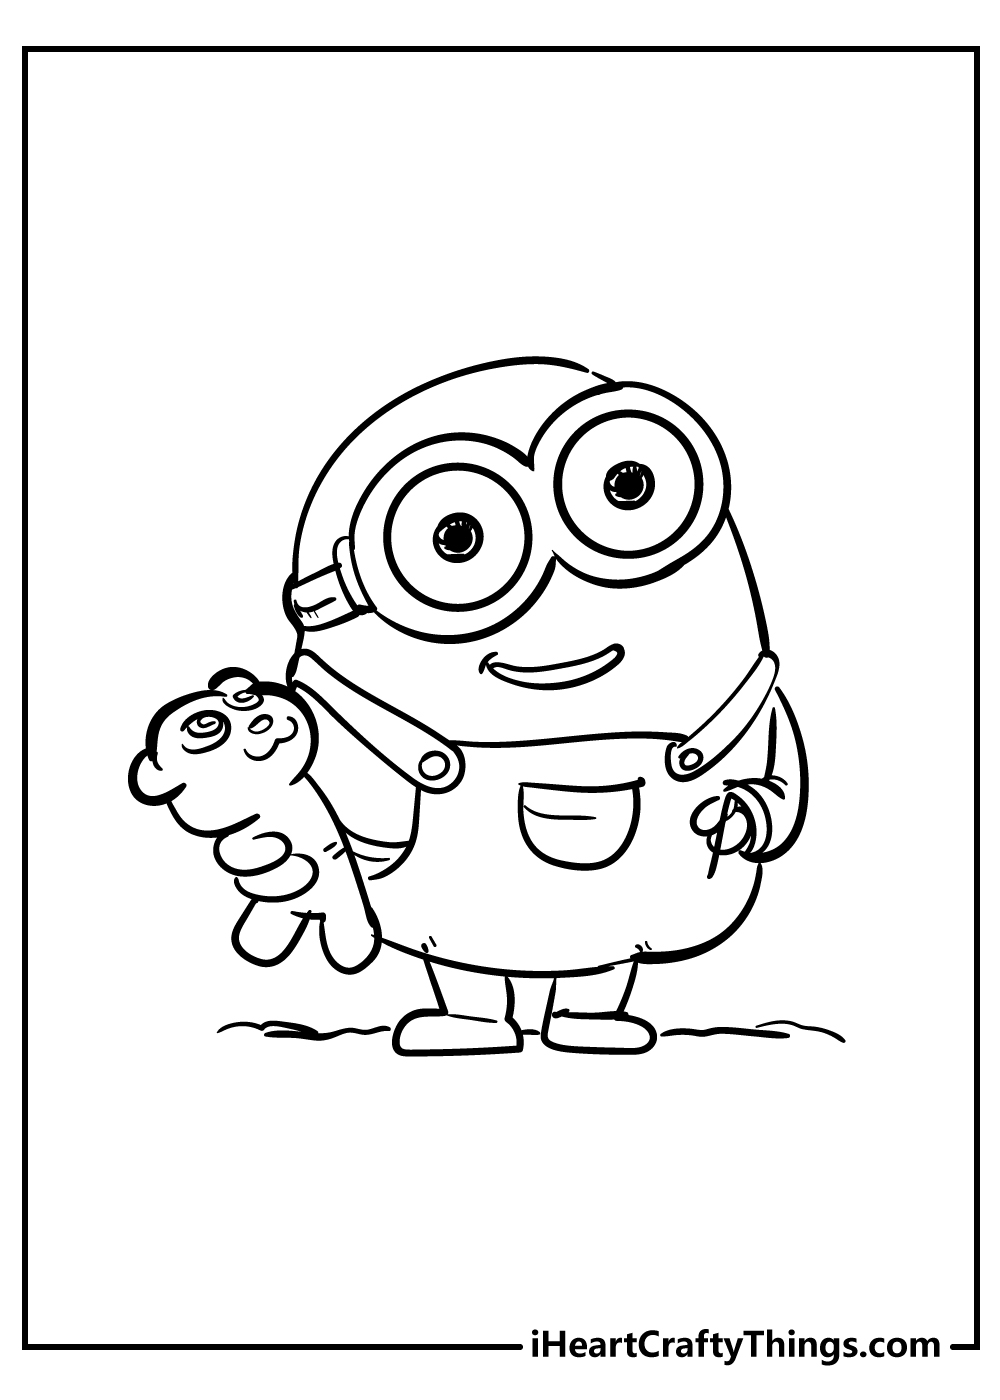 Minions Coloring Original Sheet for children free download